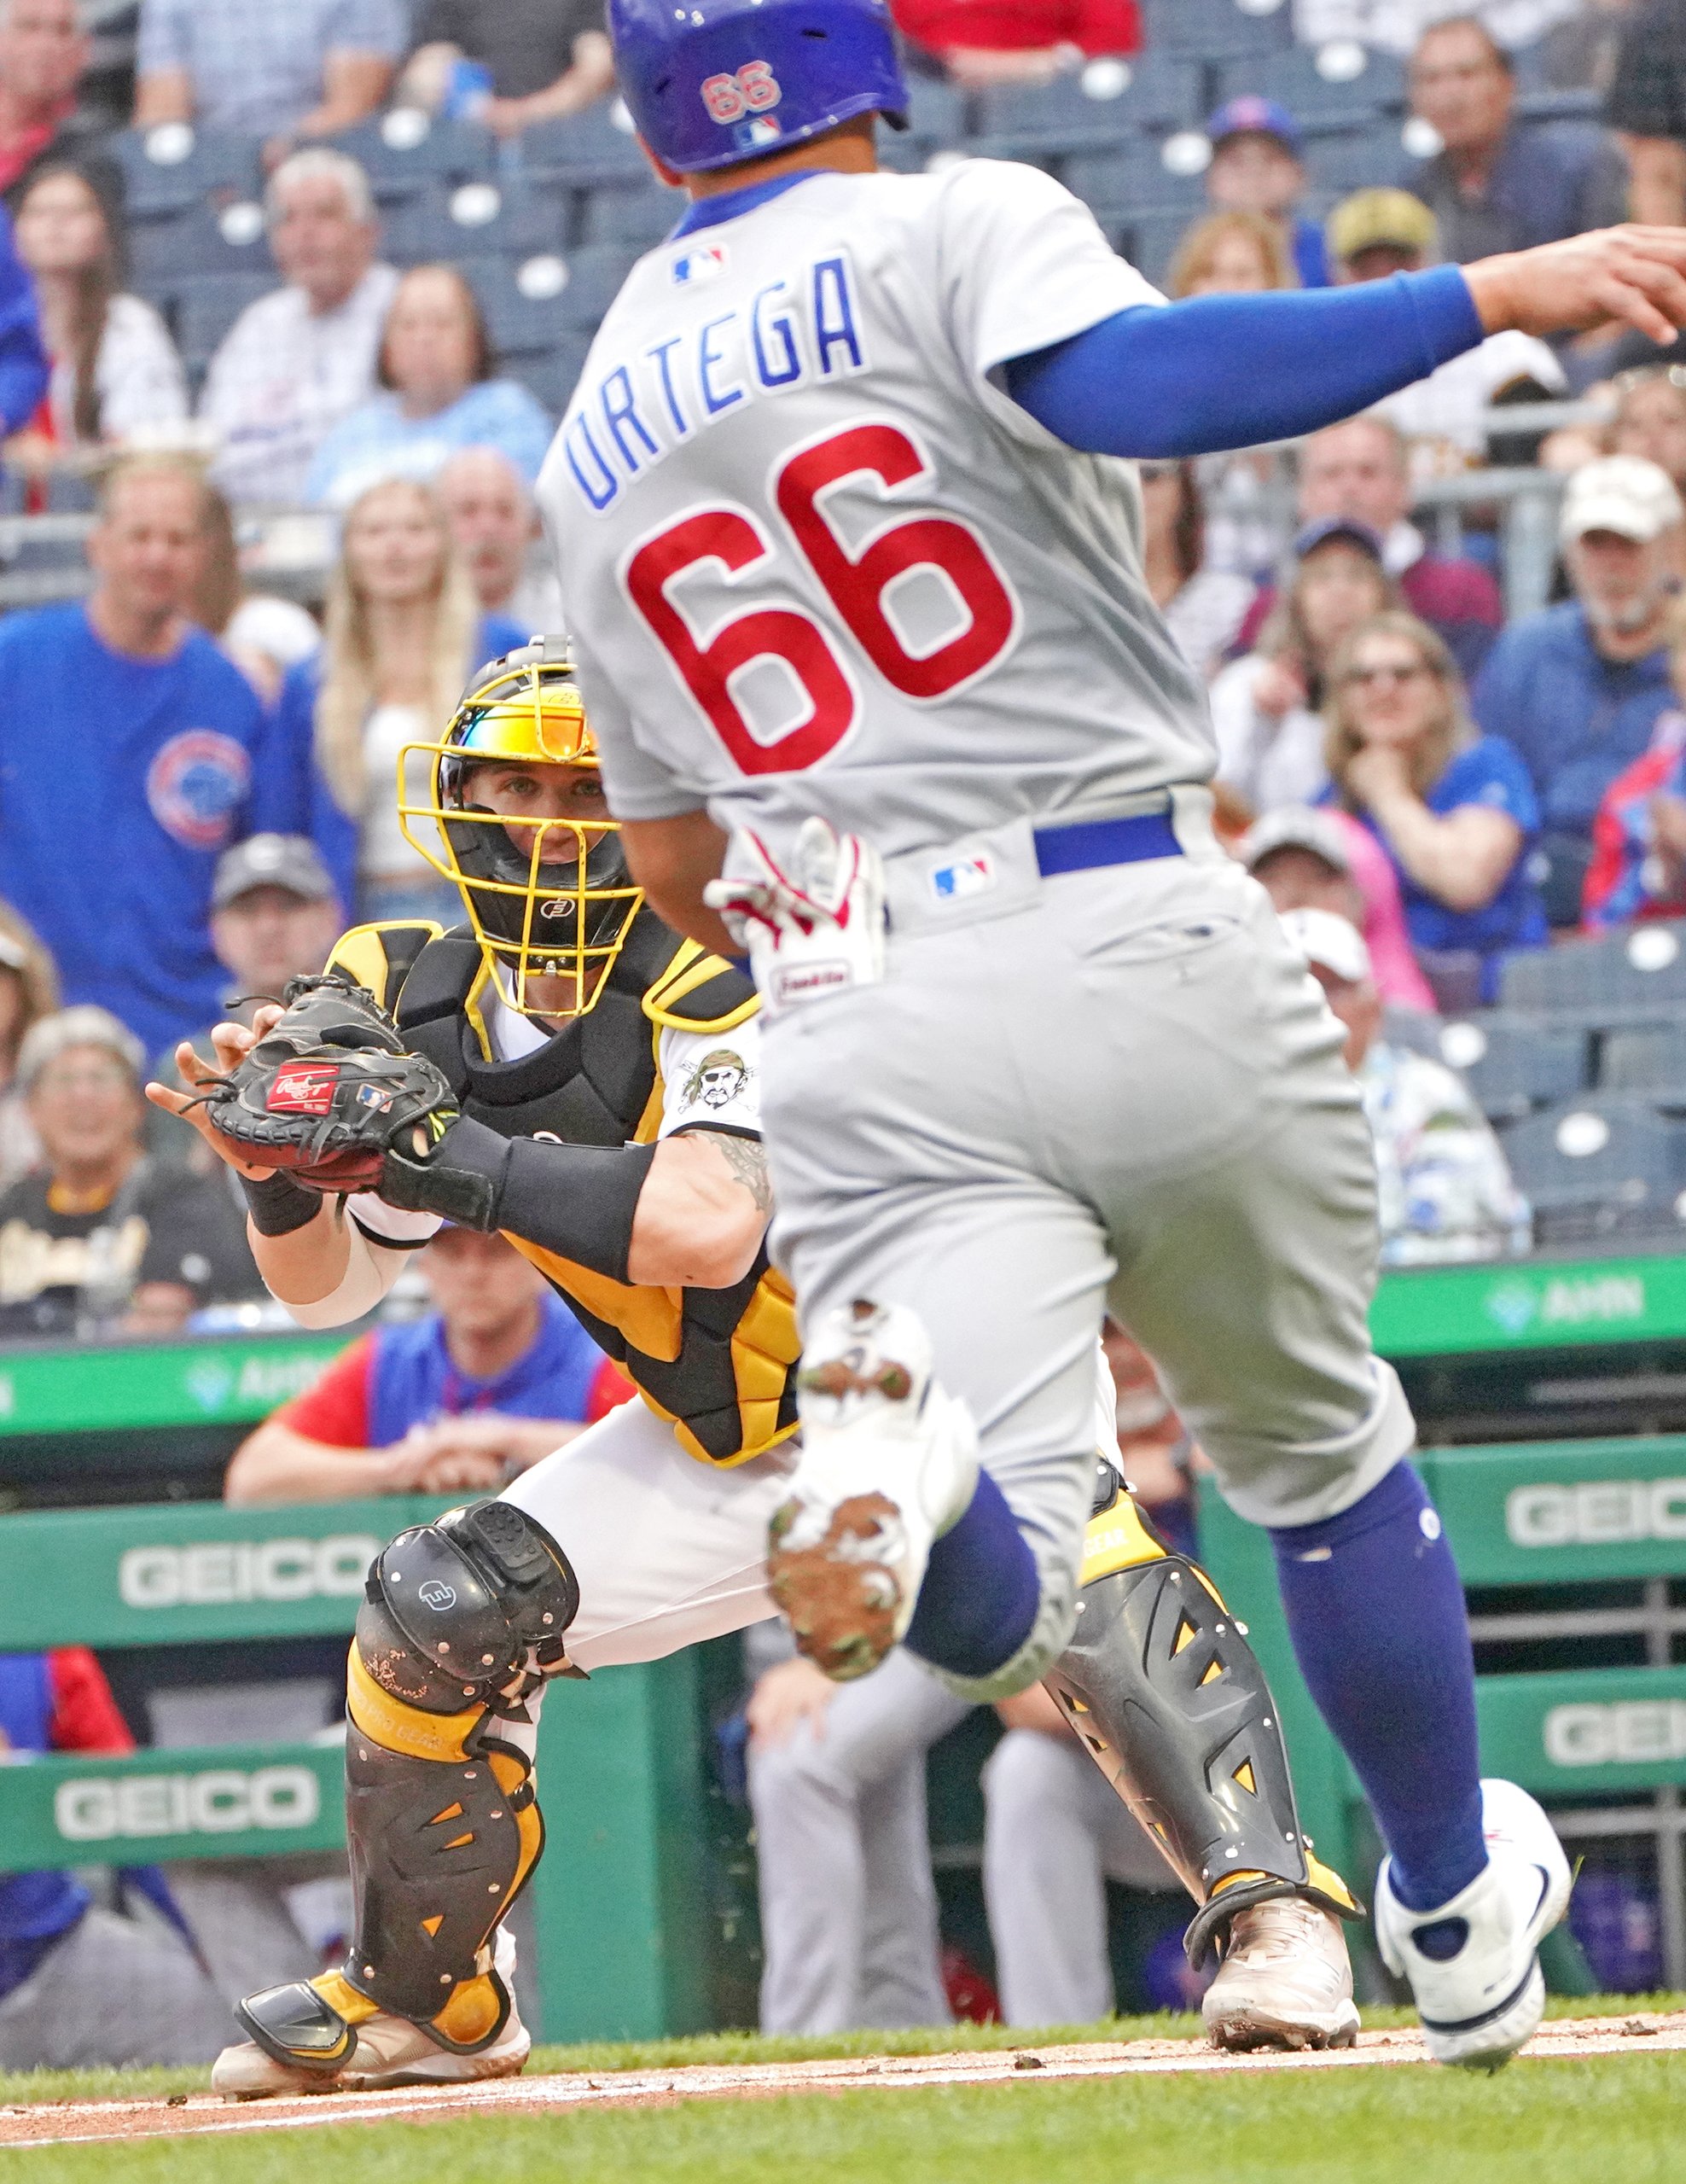  The Pirates’ catcher Tyler Heineman prepares to tag the Cubs’ Rafael Ortegal out at home on Monday, June 20, 2022, at PNC Park . The Pirates won 12-1. (Emily Matthews/Post-Gazette)  